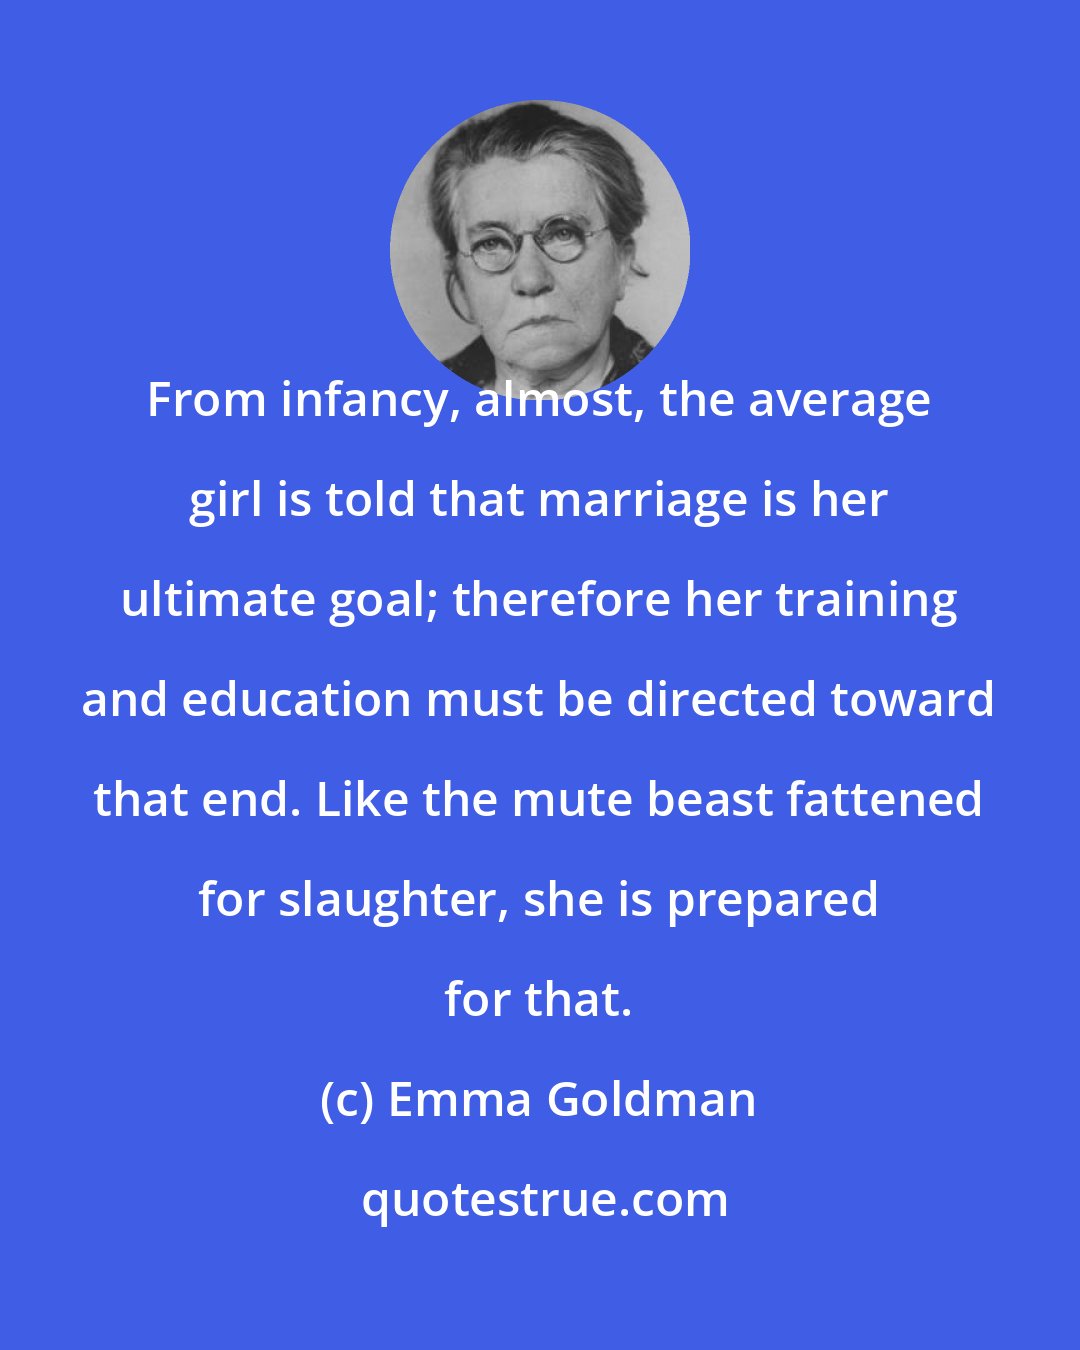 Emma Goldman: From infancy, almost, the average girl is told that marriage is her ultimate goal; therefore her training and education must be directed toward that end. Like the mute beast fattened for slaughter, she is prepared for that.